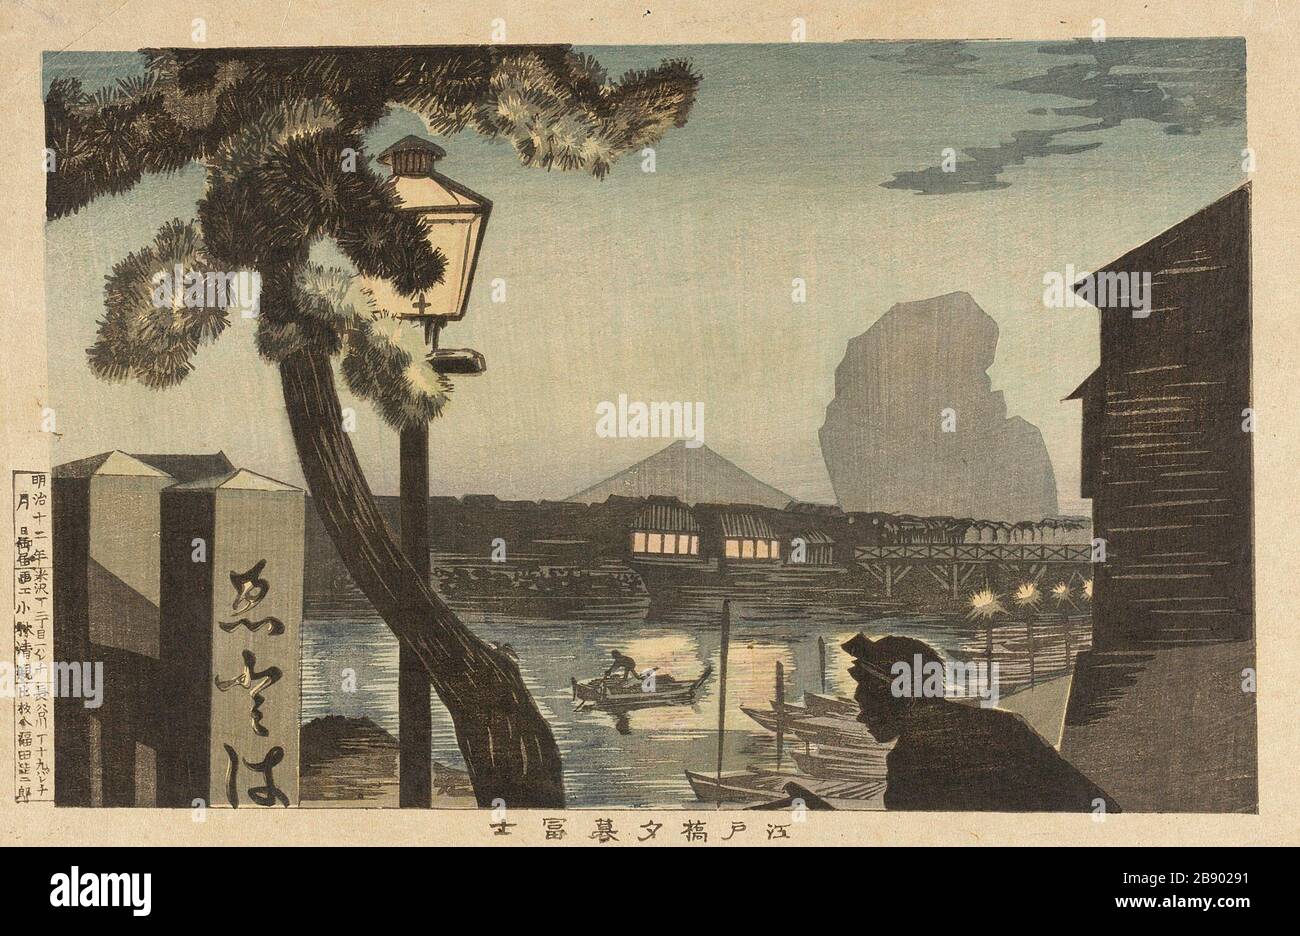 'Mt. Fuji at Dusk from Edo Bridge; English:  Japan, 1879 Prints; woodcuts Color woodblock print Image: 8 7/16 x 13 1/8 in. (21.5 x 33.3 cm);  Paper: 9 11/16 x 14 3/8 in. (24.6 x 36.6 cm) Gift of Mr. and Mrs. Felix Juda (M.73.37.462) Japanese Art; 1879date QS:P571,+1879-00-00T00:00:00Z/9; ' Stock Photo